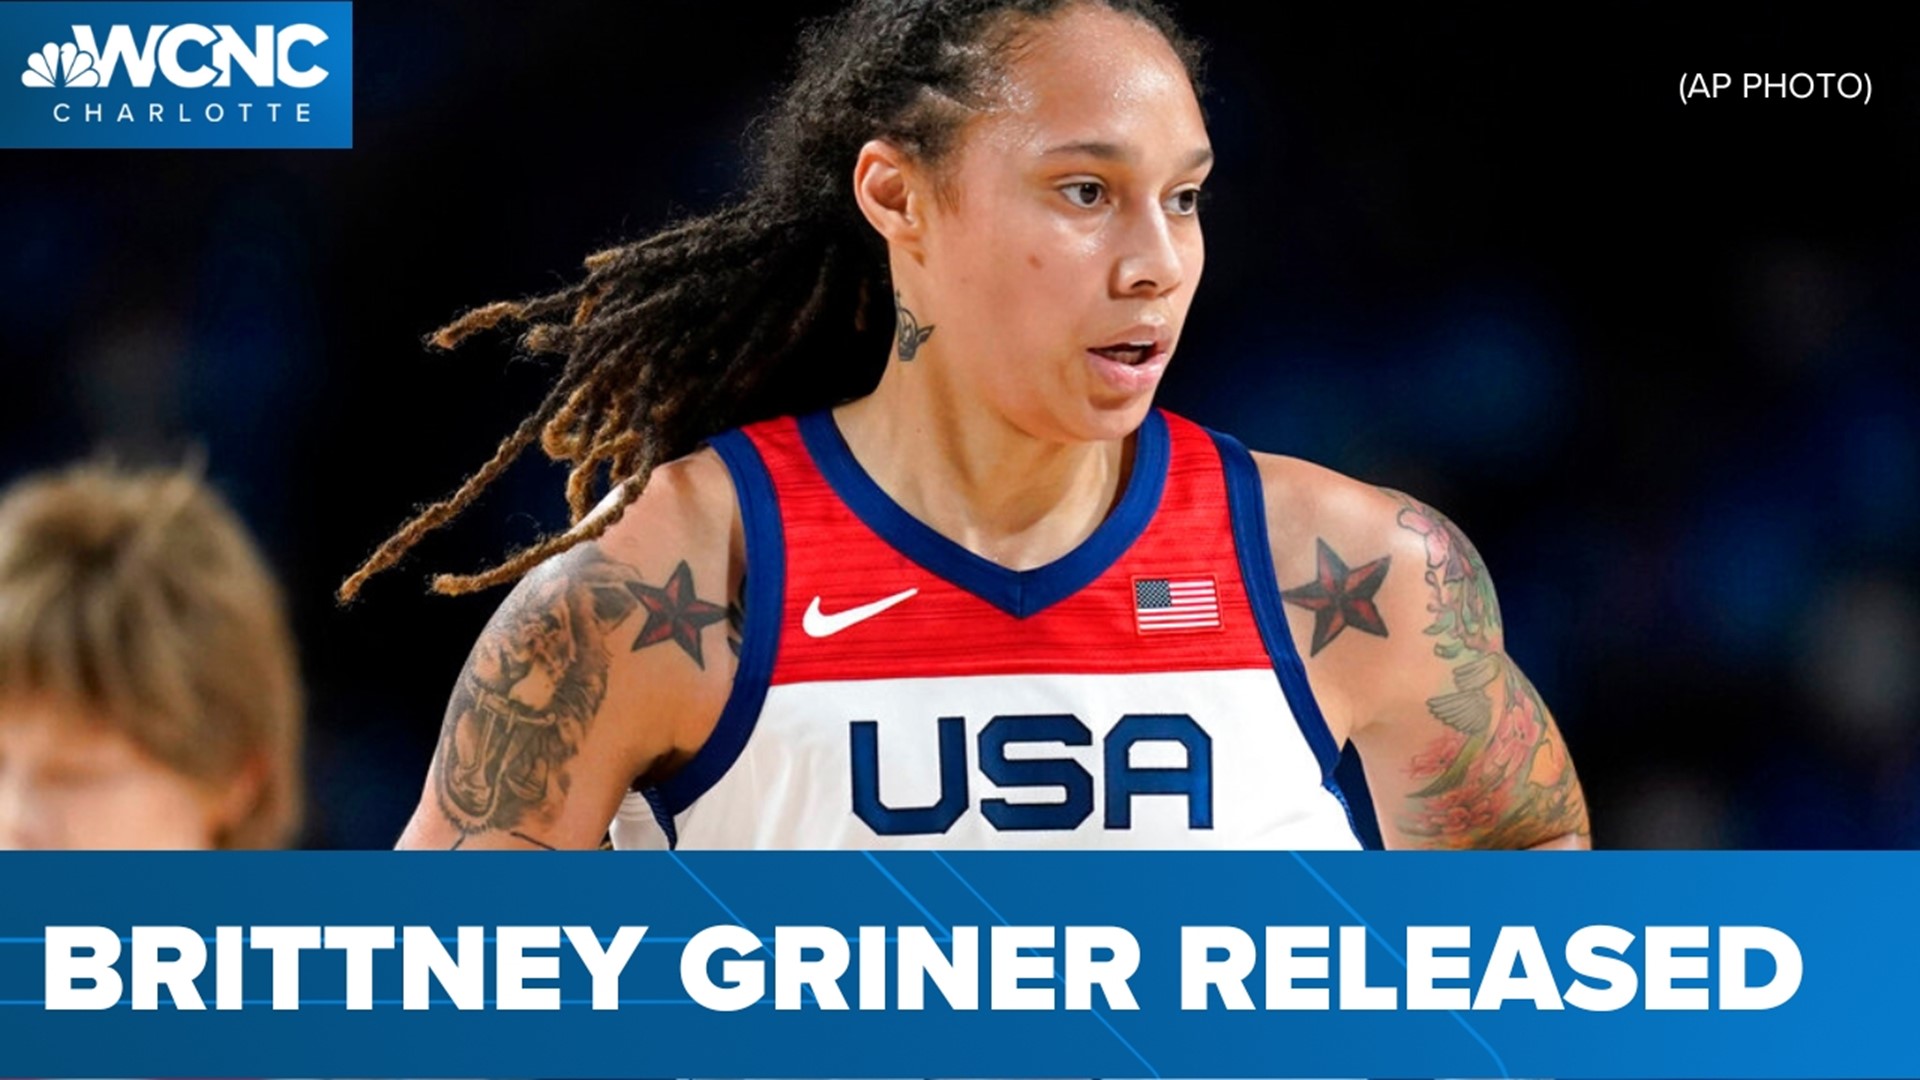 WNBA star Brittney Griner is free today after the Biden Administration secured her release from a Russian penal colony.